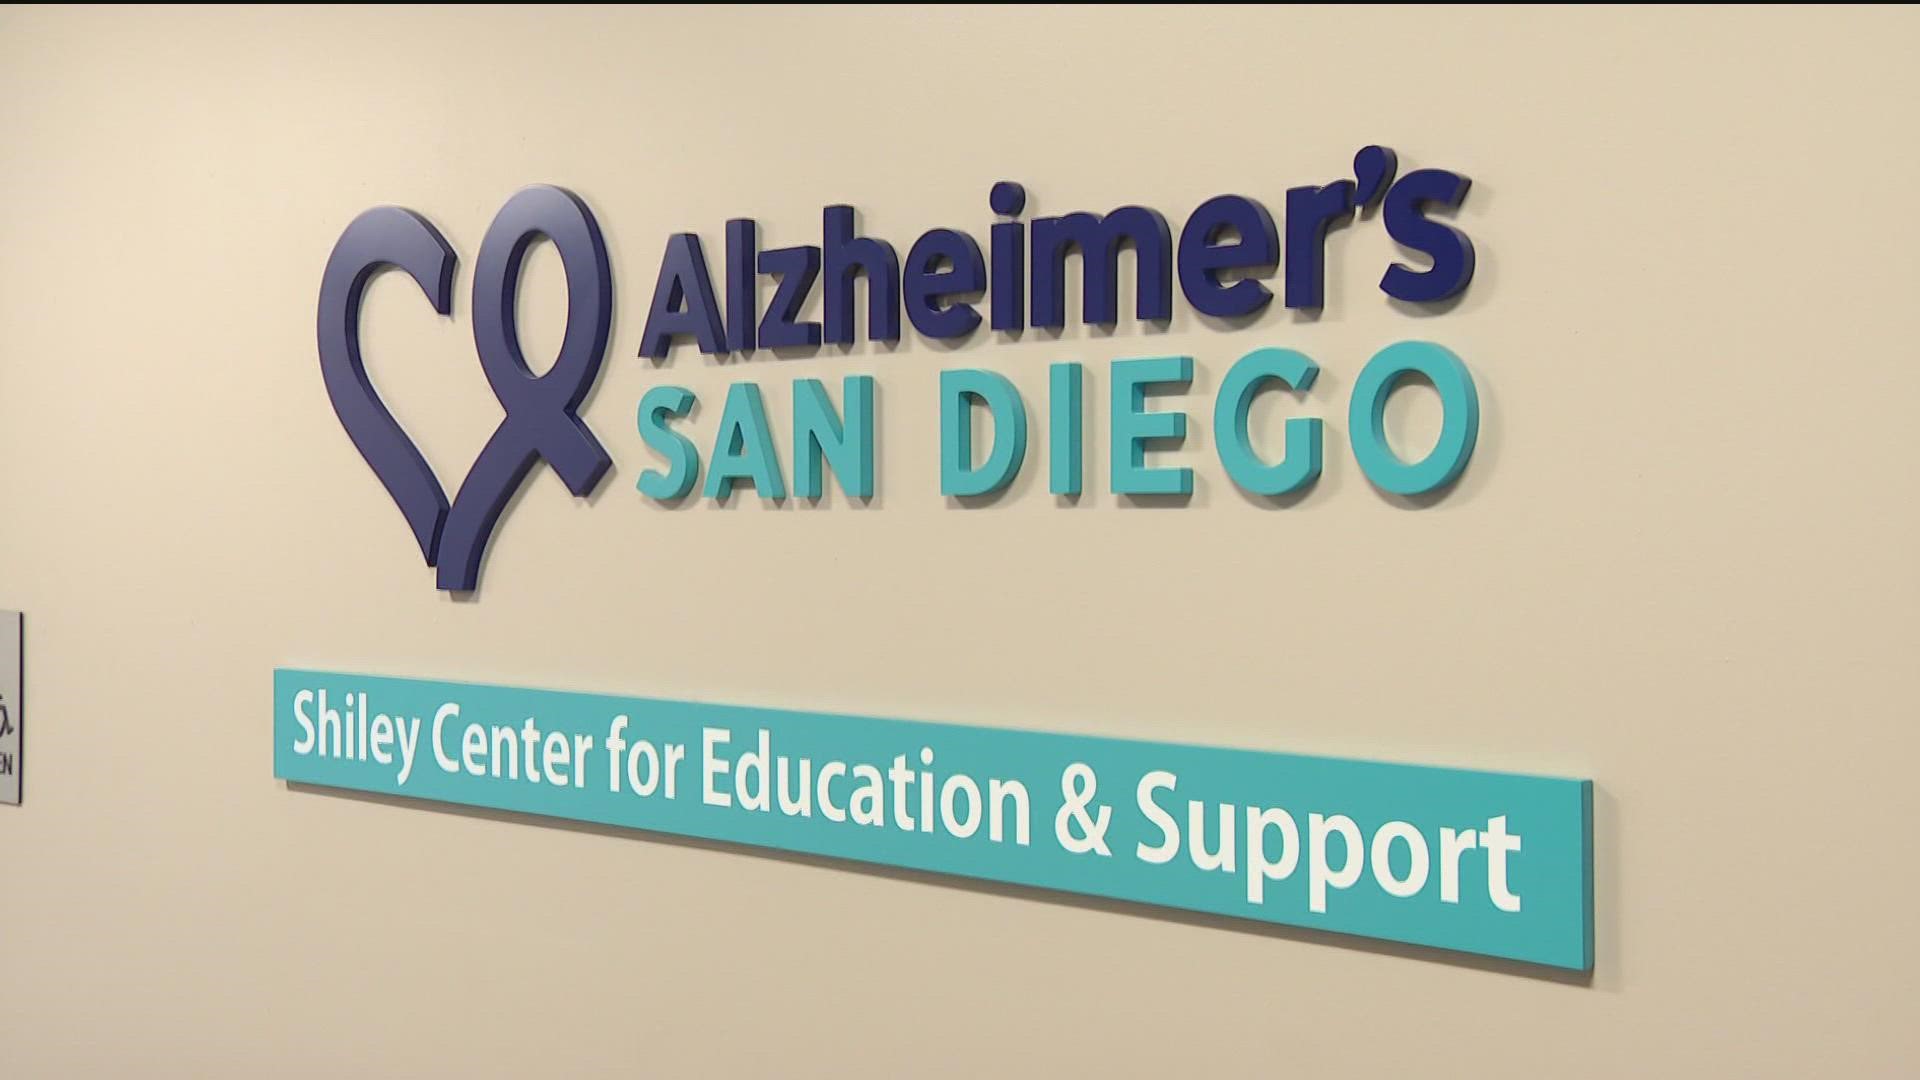 Alzheimer’s San Diego is extending its reach, making it easier to help the estimated 100,000 people in the county living with Alzheimer’s disease.